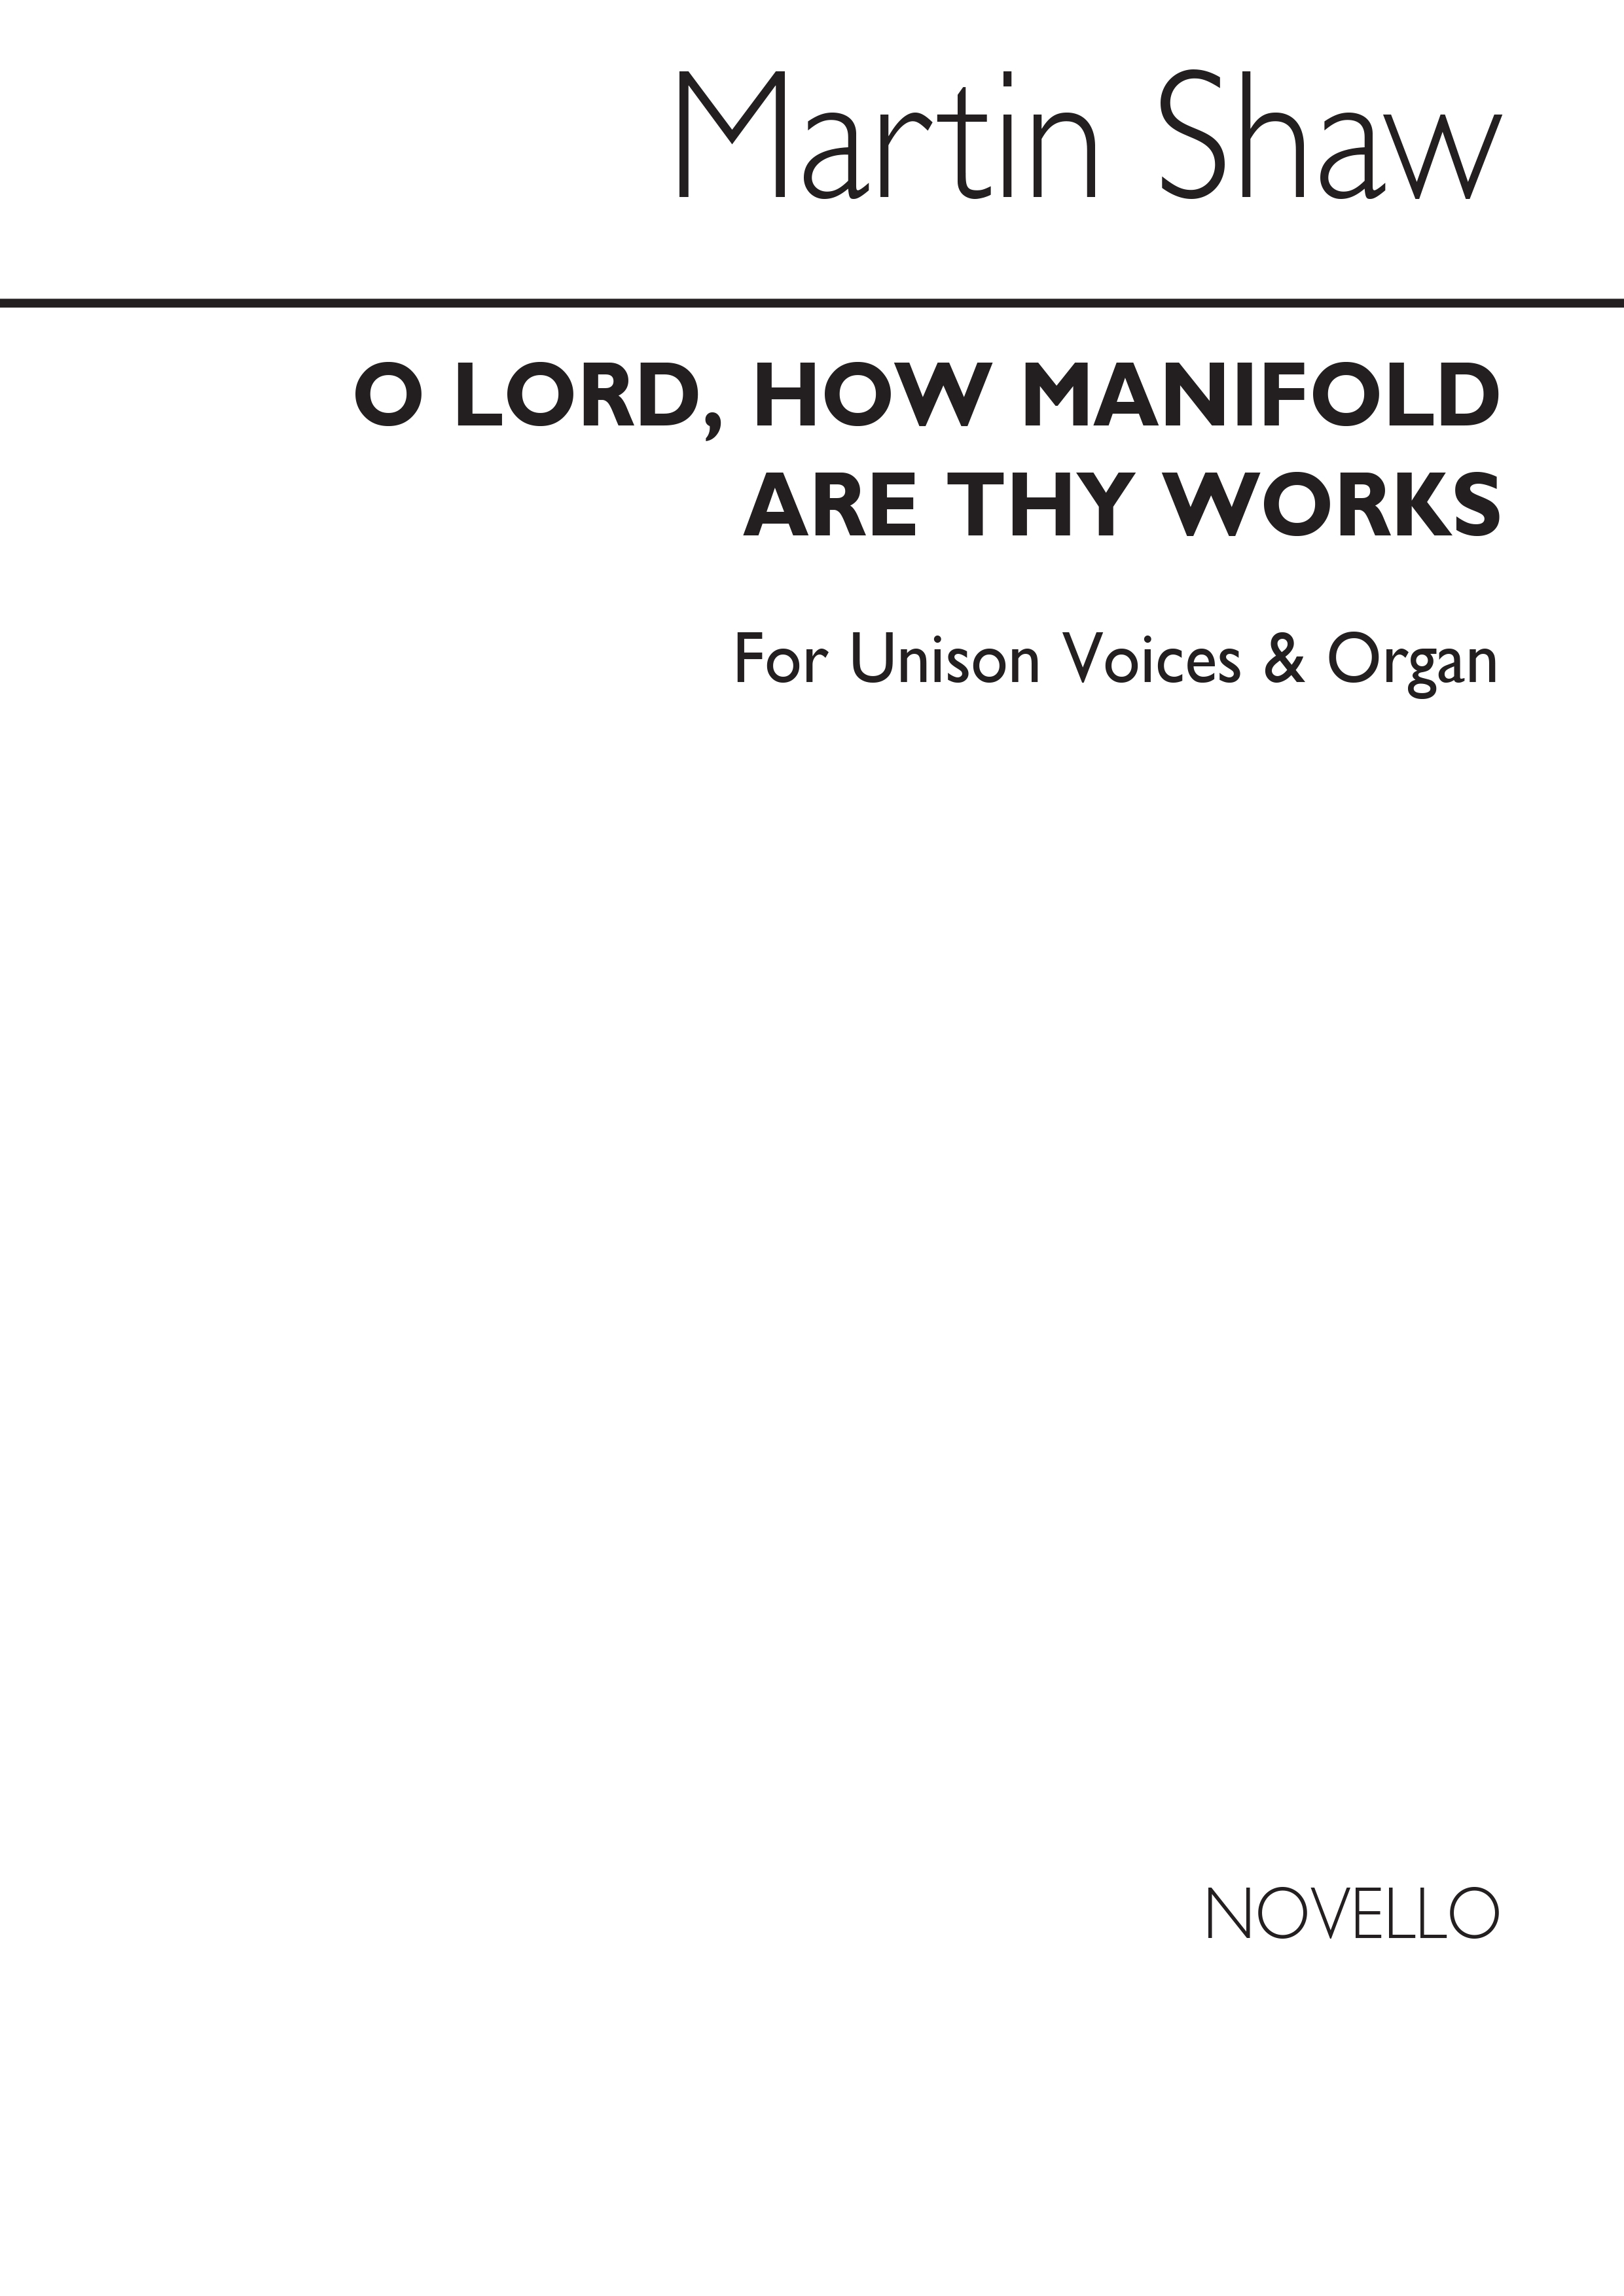 Martin Shaw: O Lord, How Manifold Are Thy Works for Unison Voices